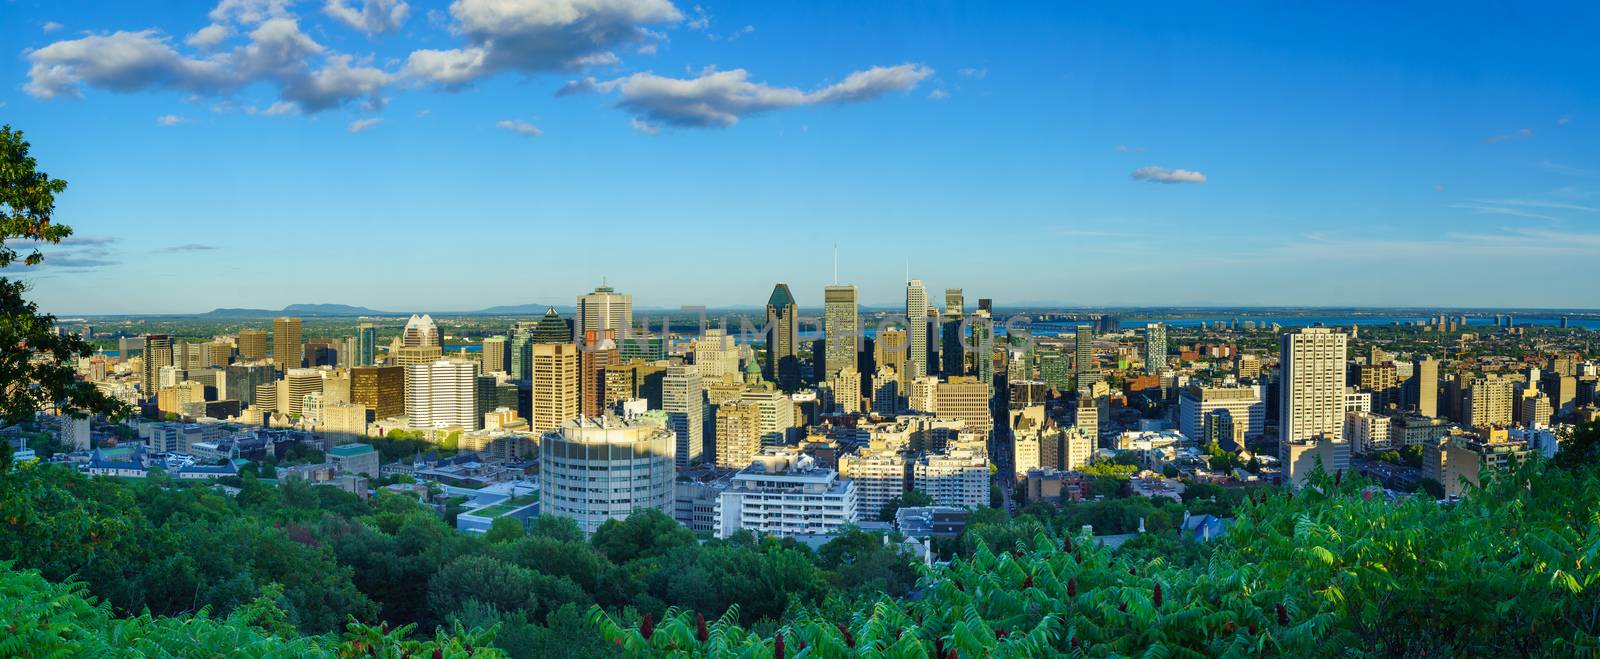 Panoramic view of the Downtown Montreal  by RnDmS